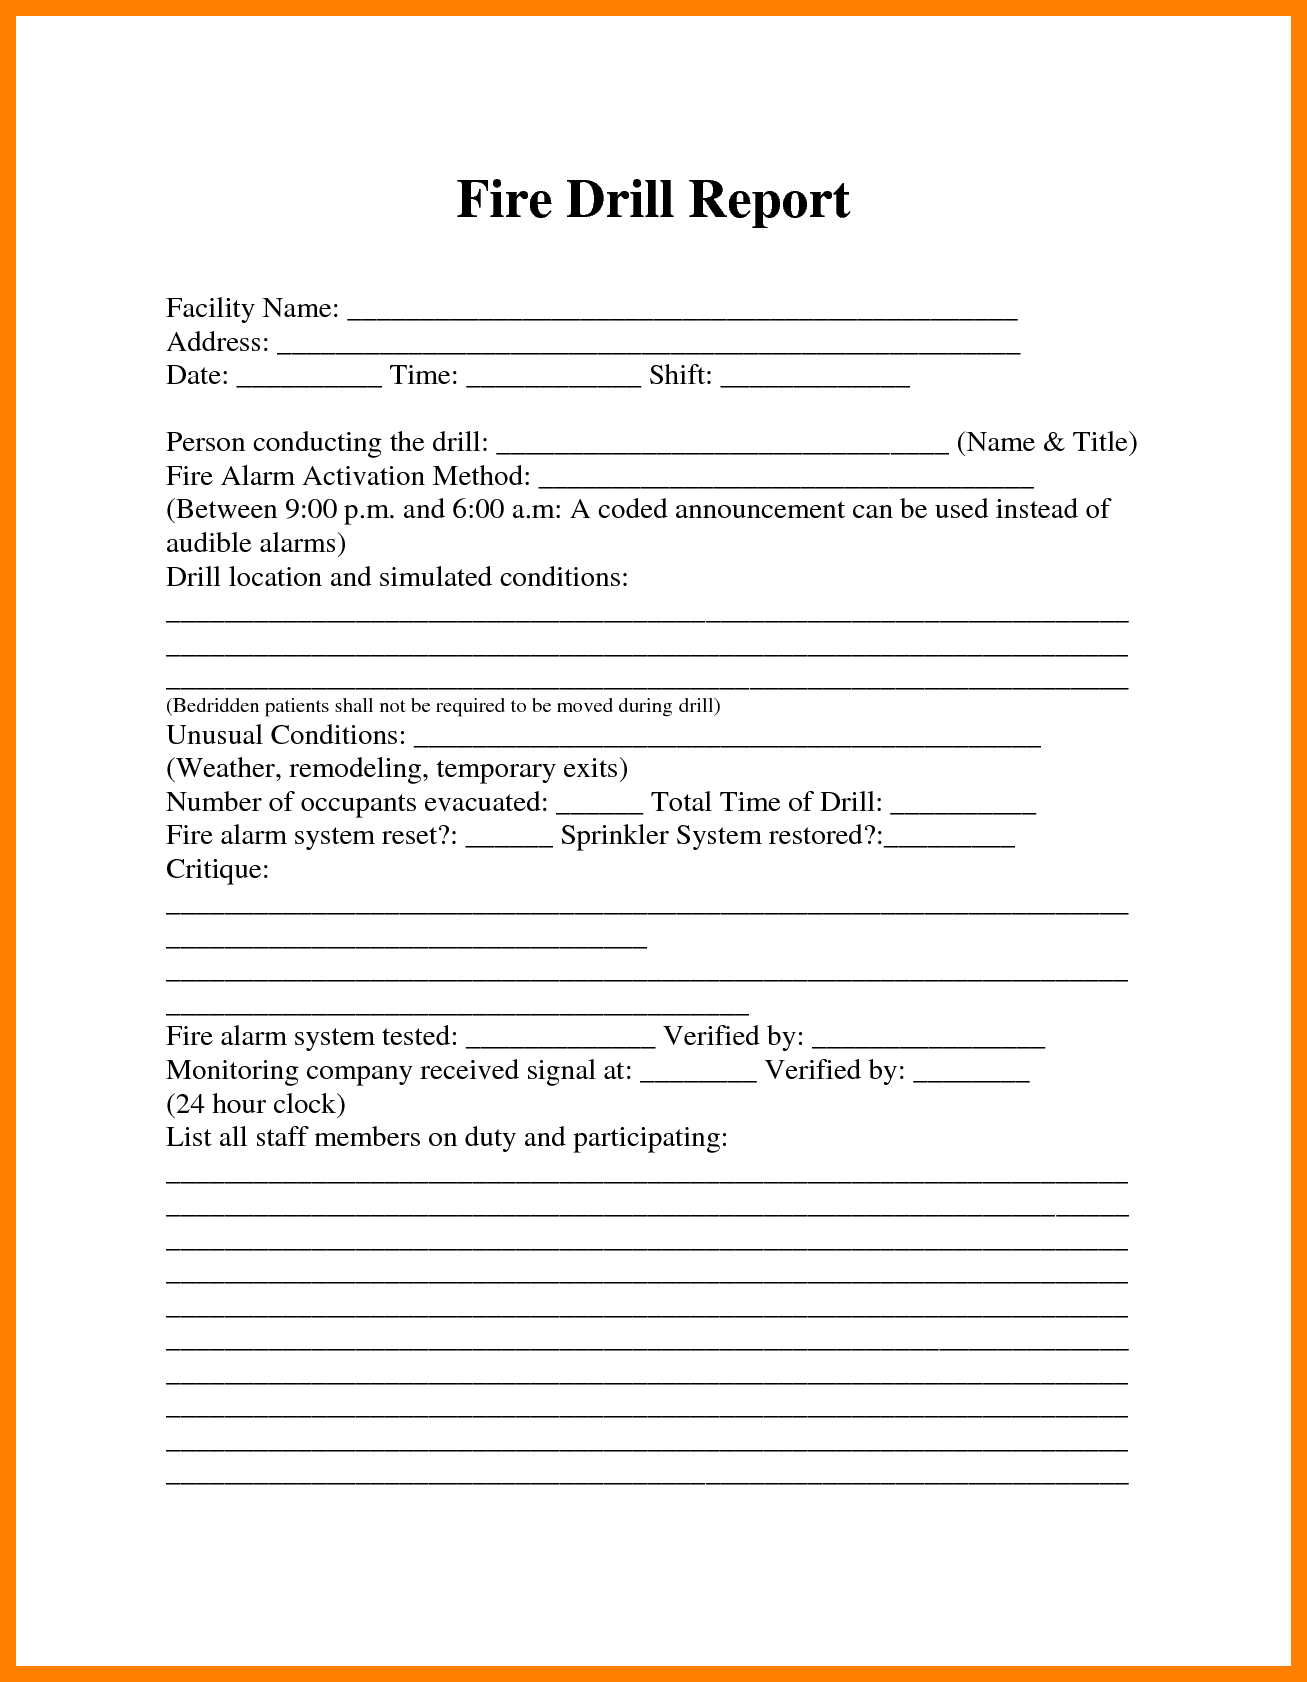 printable-fire-drill-form-template-printable-templates